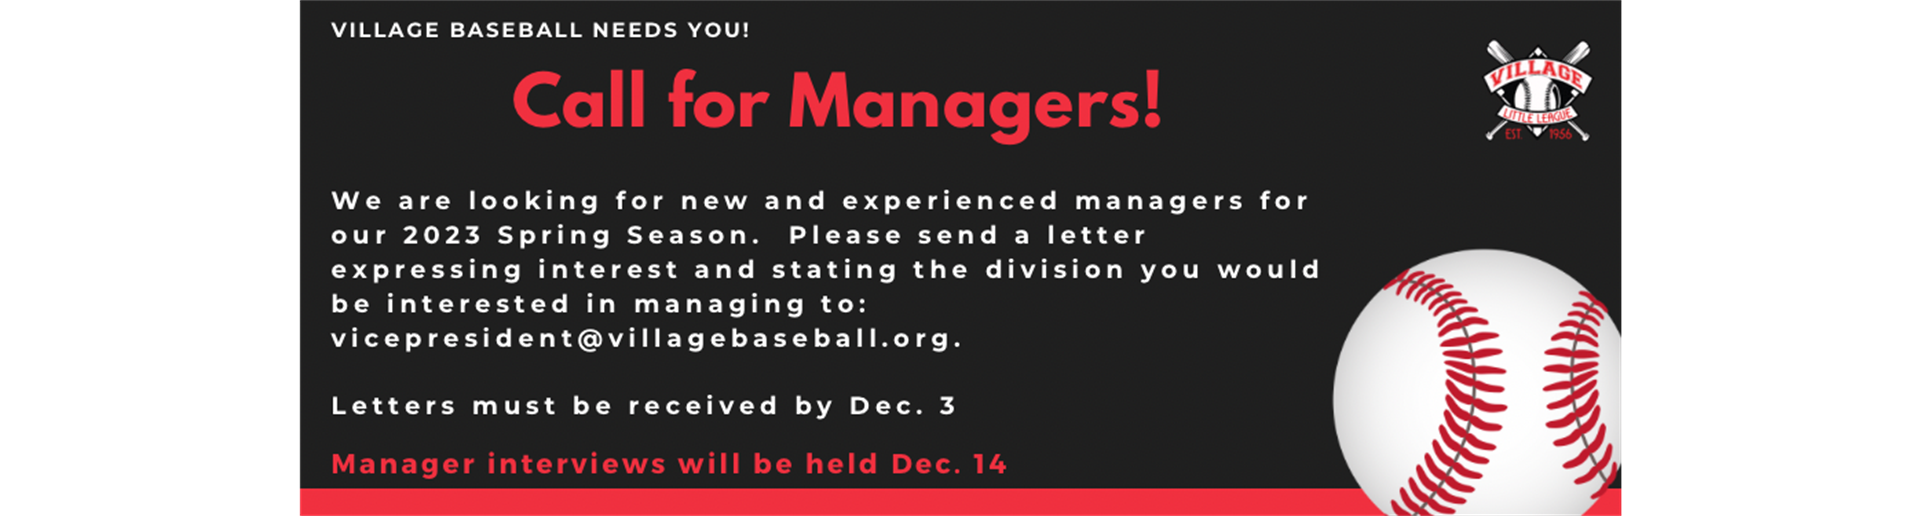 Call for Managers!